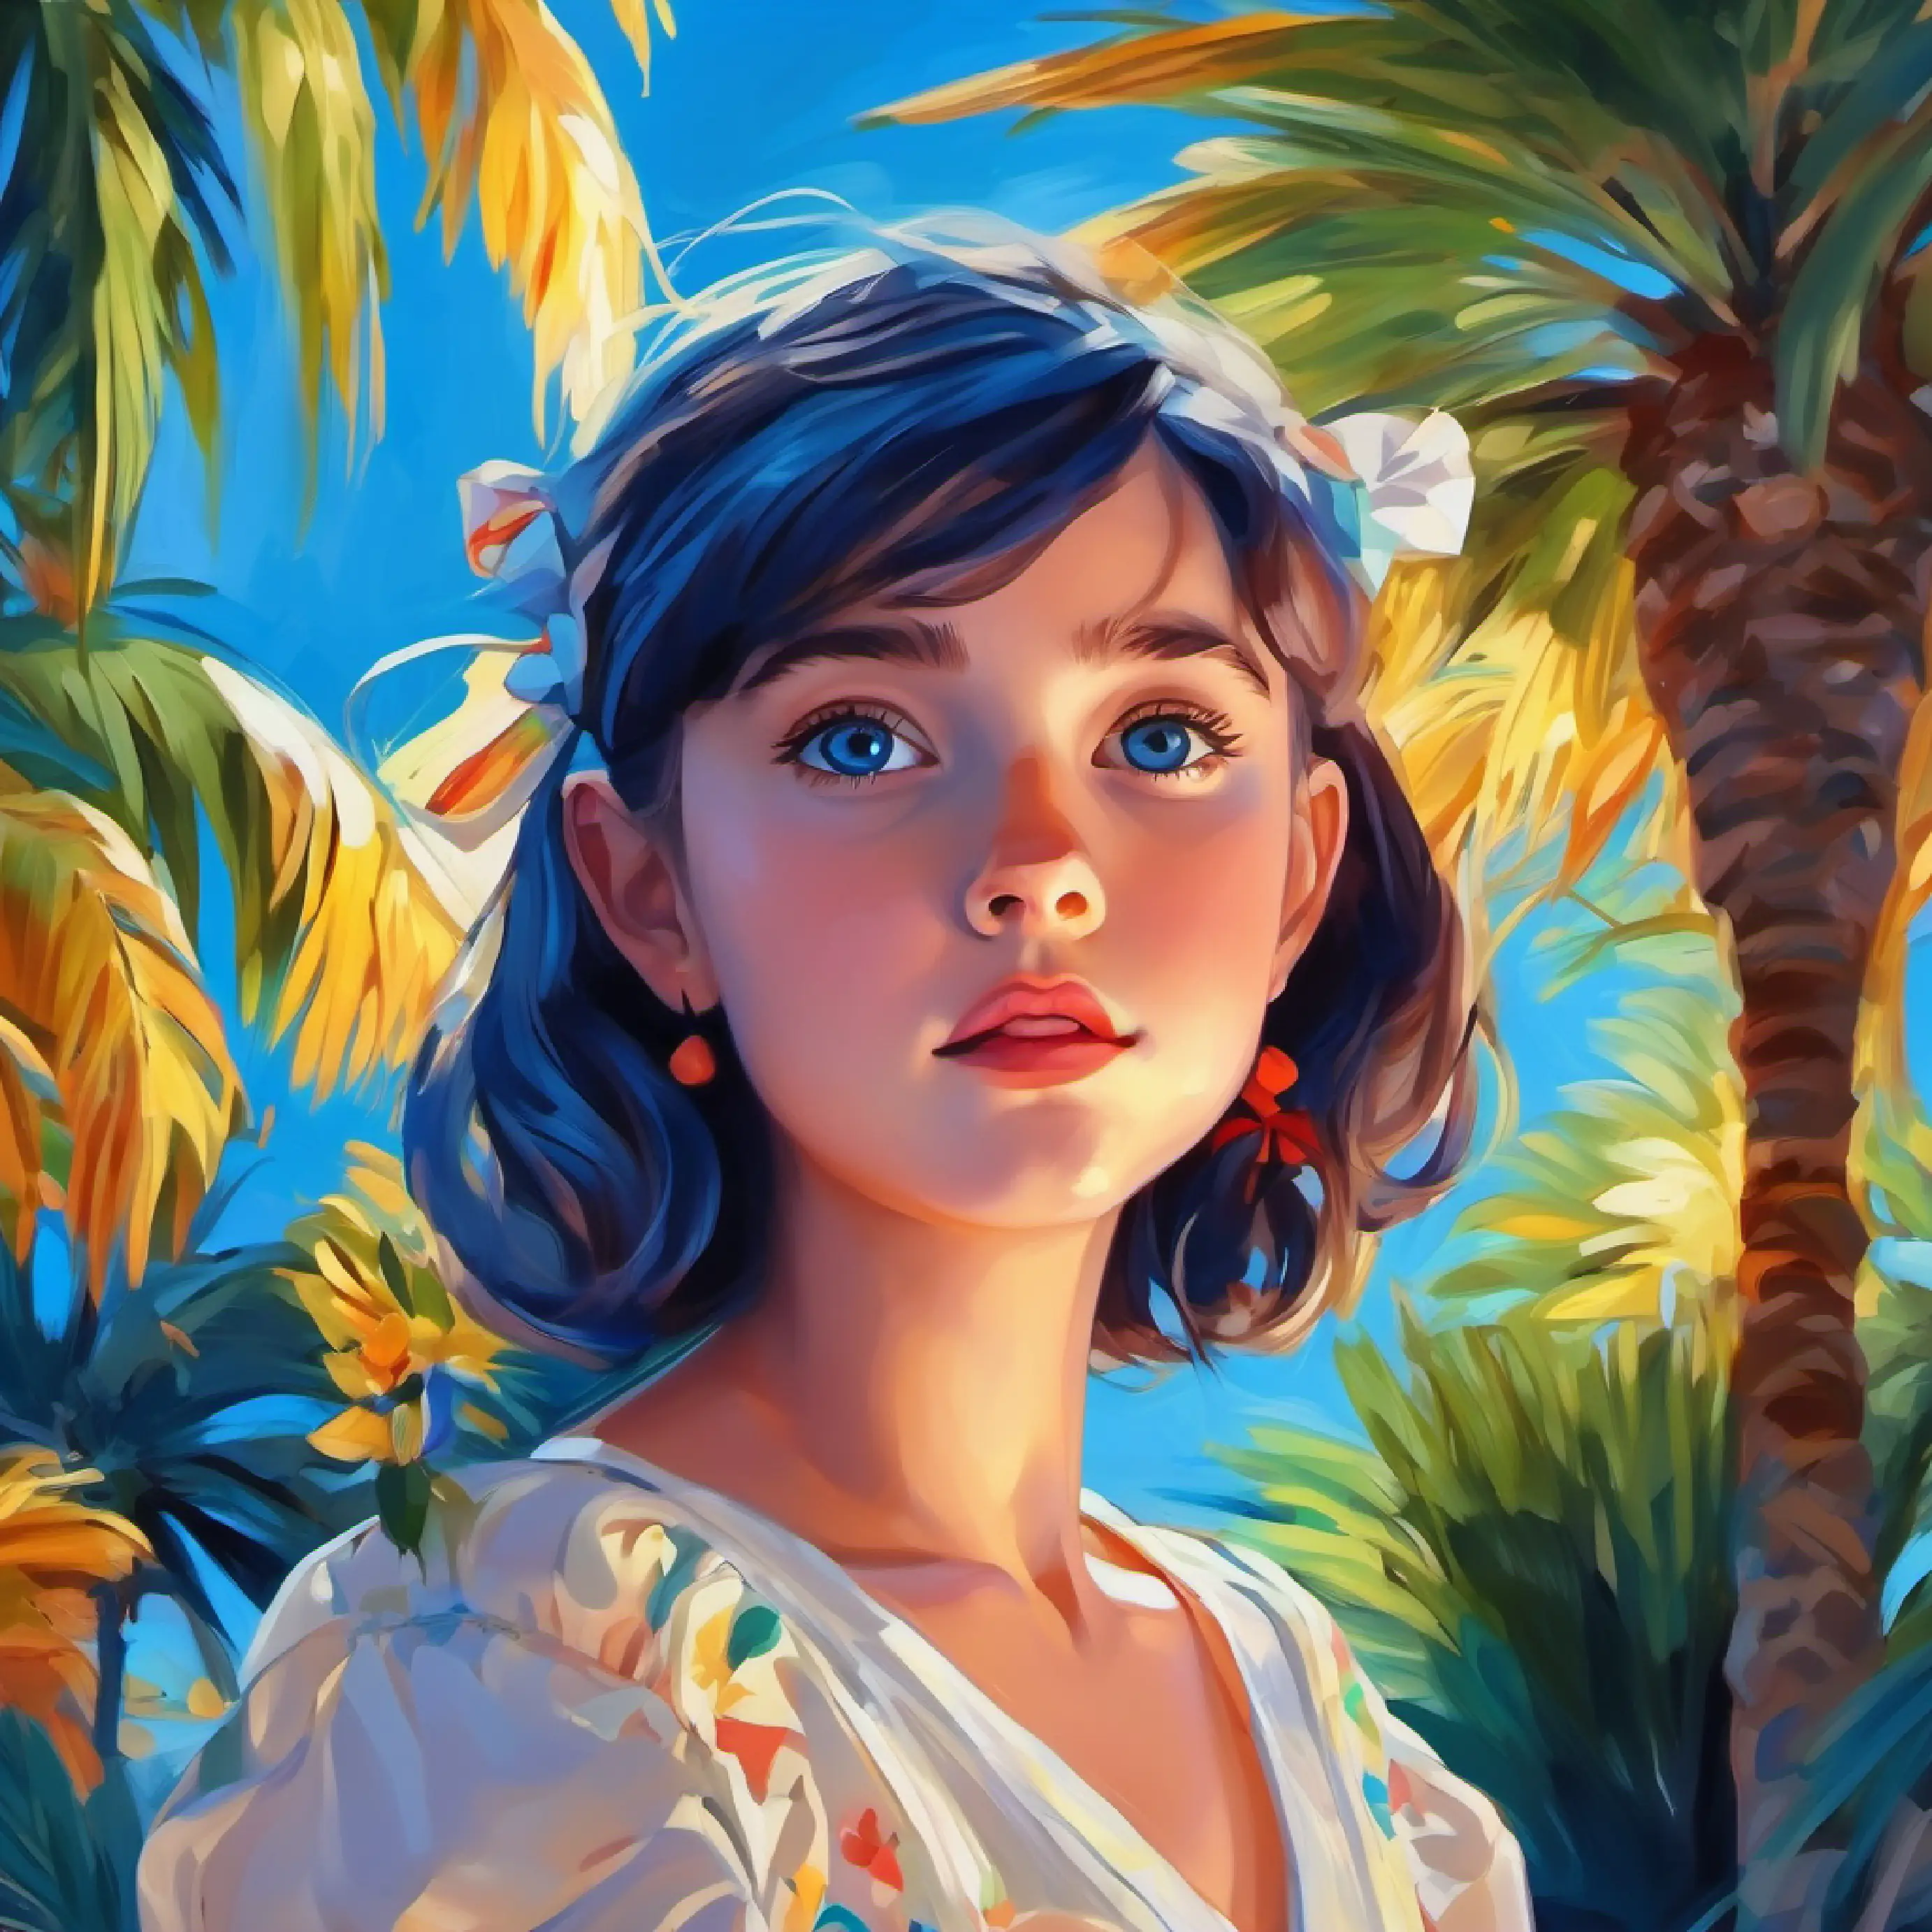 Girl's lullaby, palm trees sway, Curious girl, fair skin, deep blue eyes, always daydreaming feels embraced.